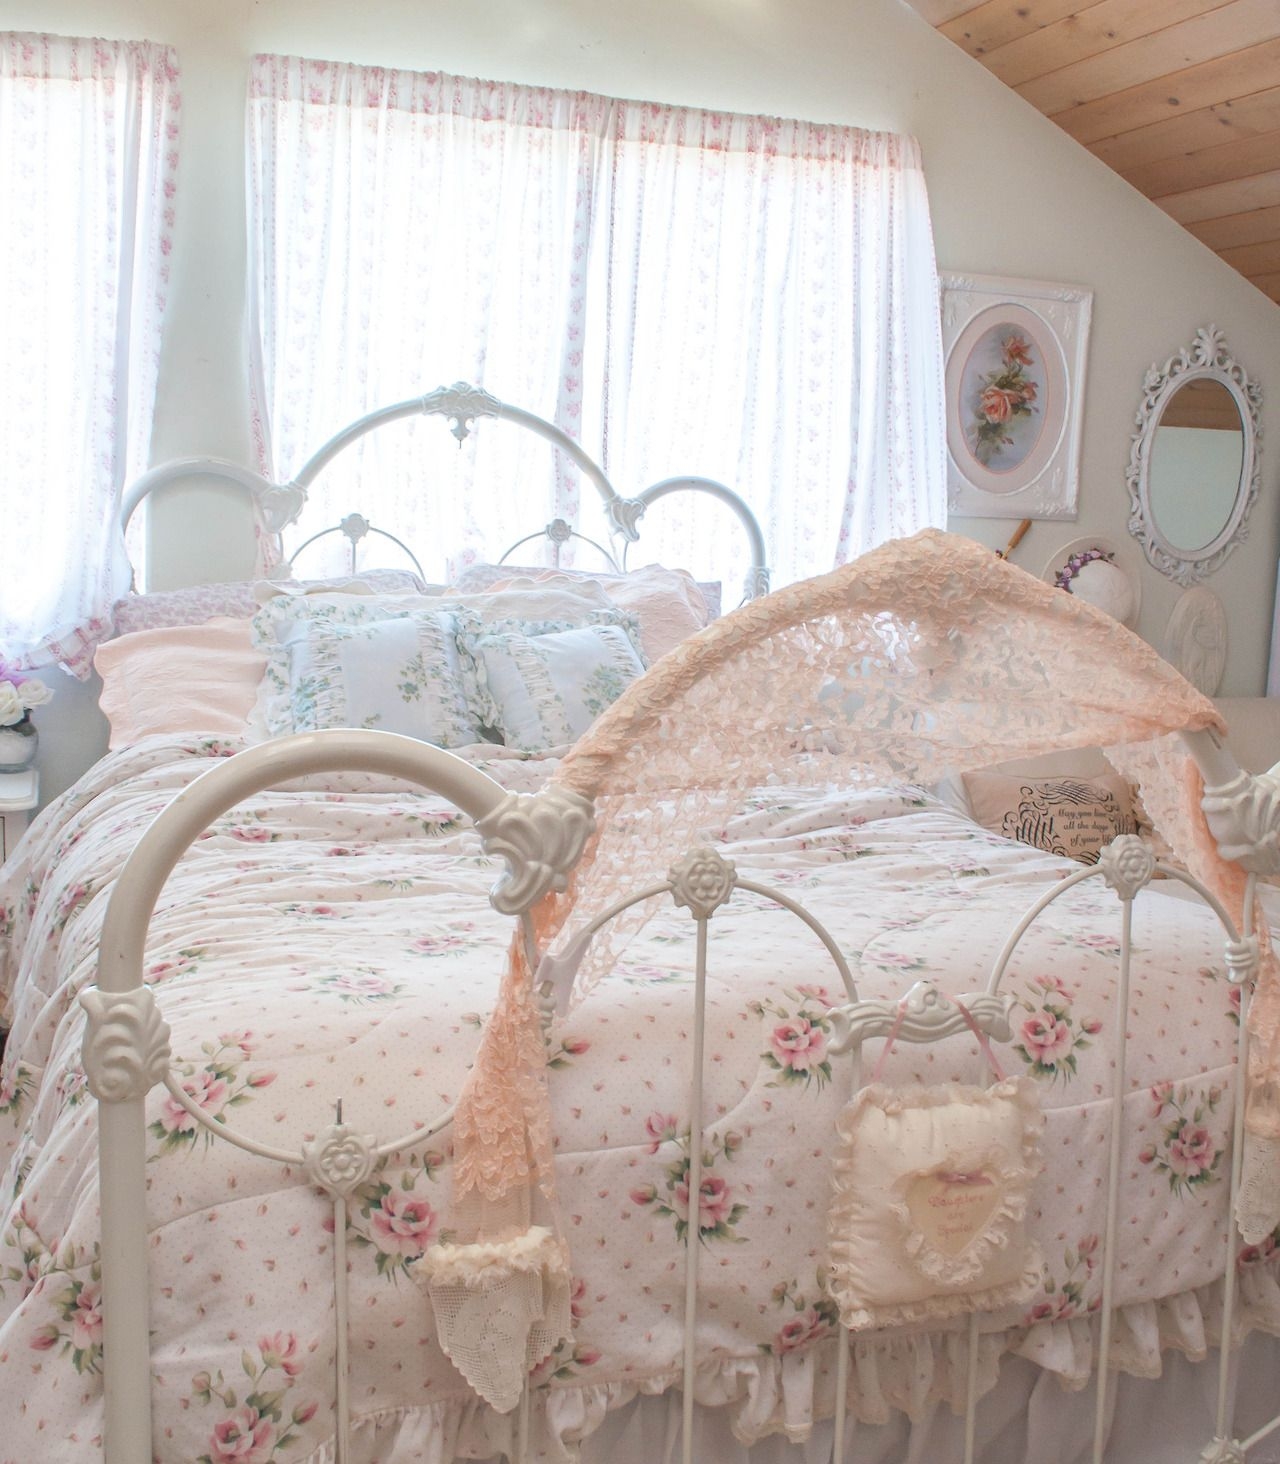 Iron bed frame including pink flowery bed sheets and white